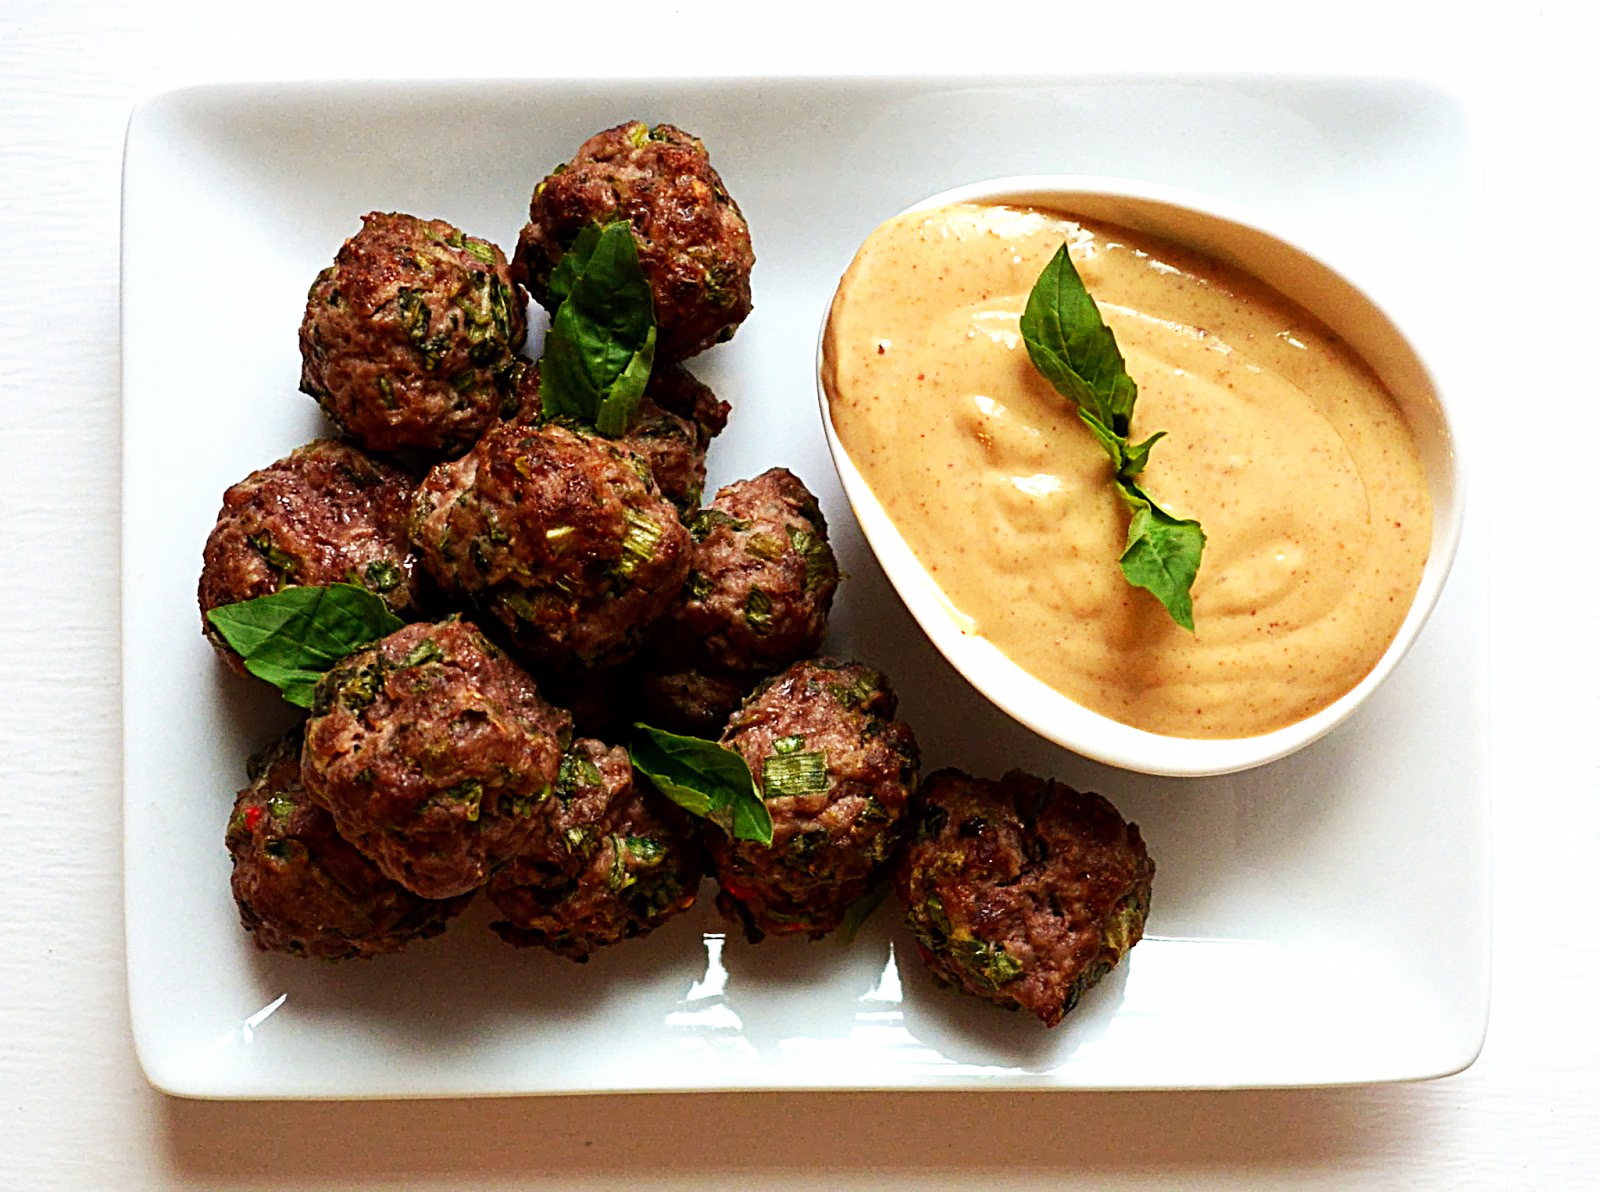 This is how to cook delicious meatballs